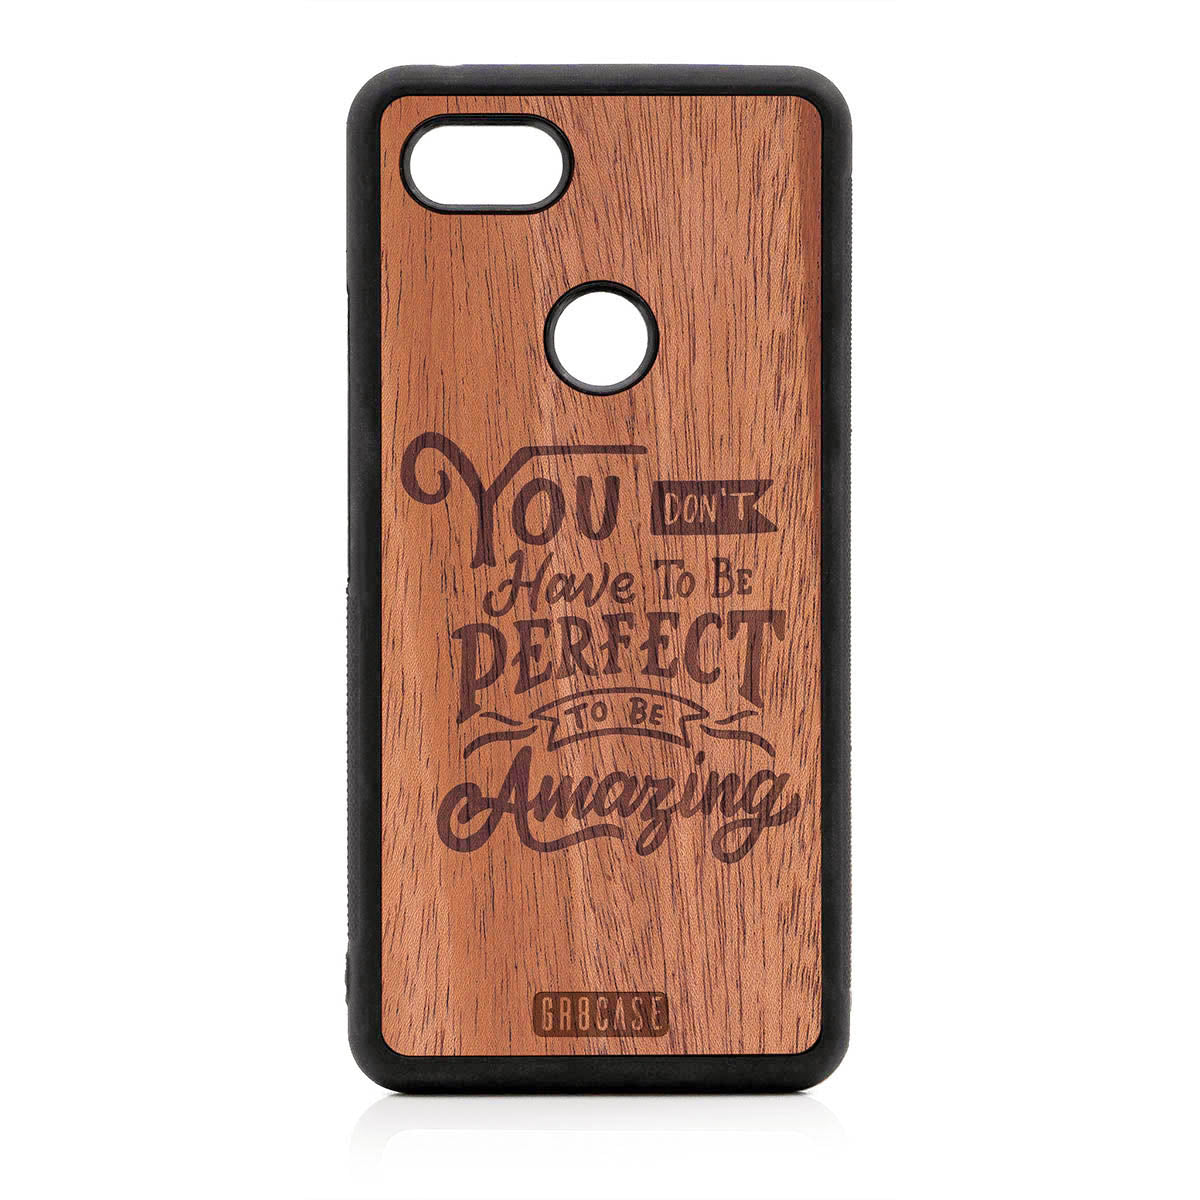 You Don't Have To Be Perfect To Be Amazing Design Wood Case For Google Pixel 3 XL